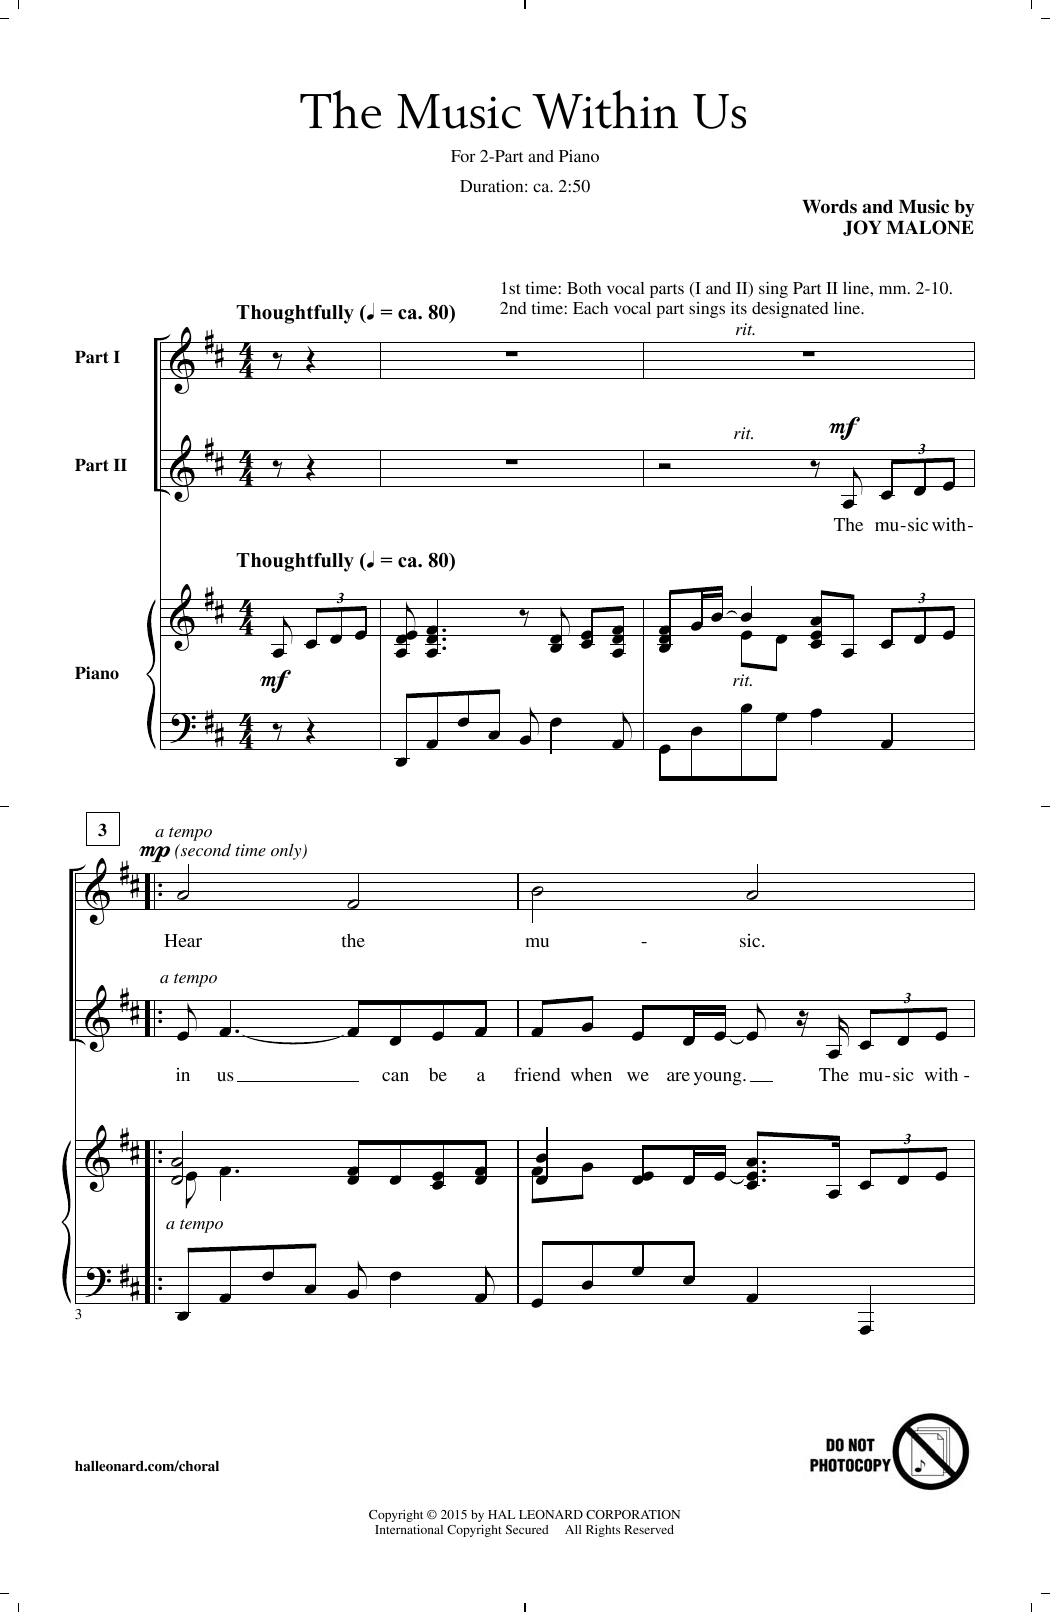 Download Joy Malone The Music Within Us Sheet Music